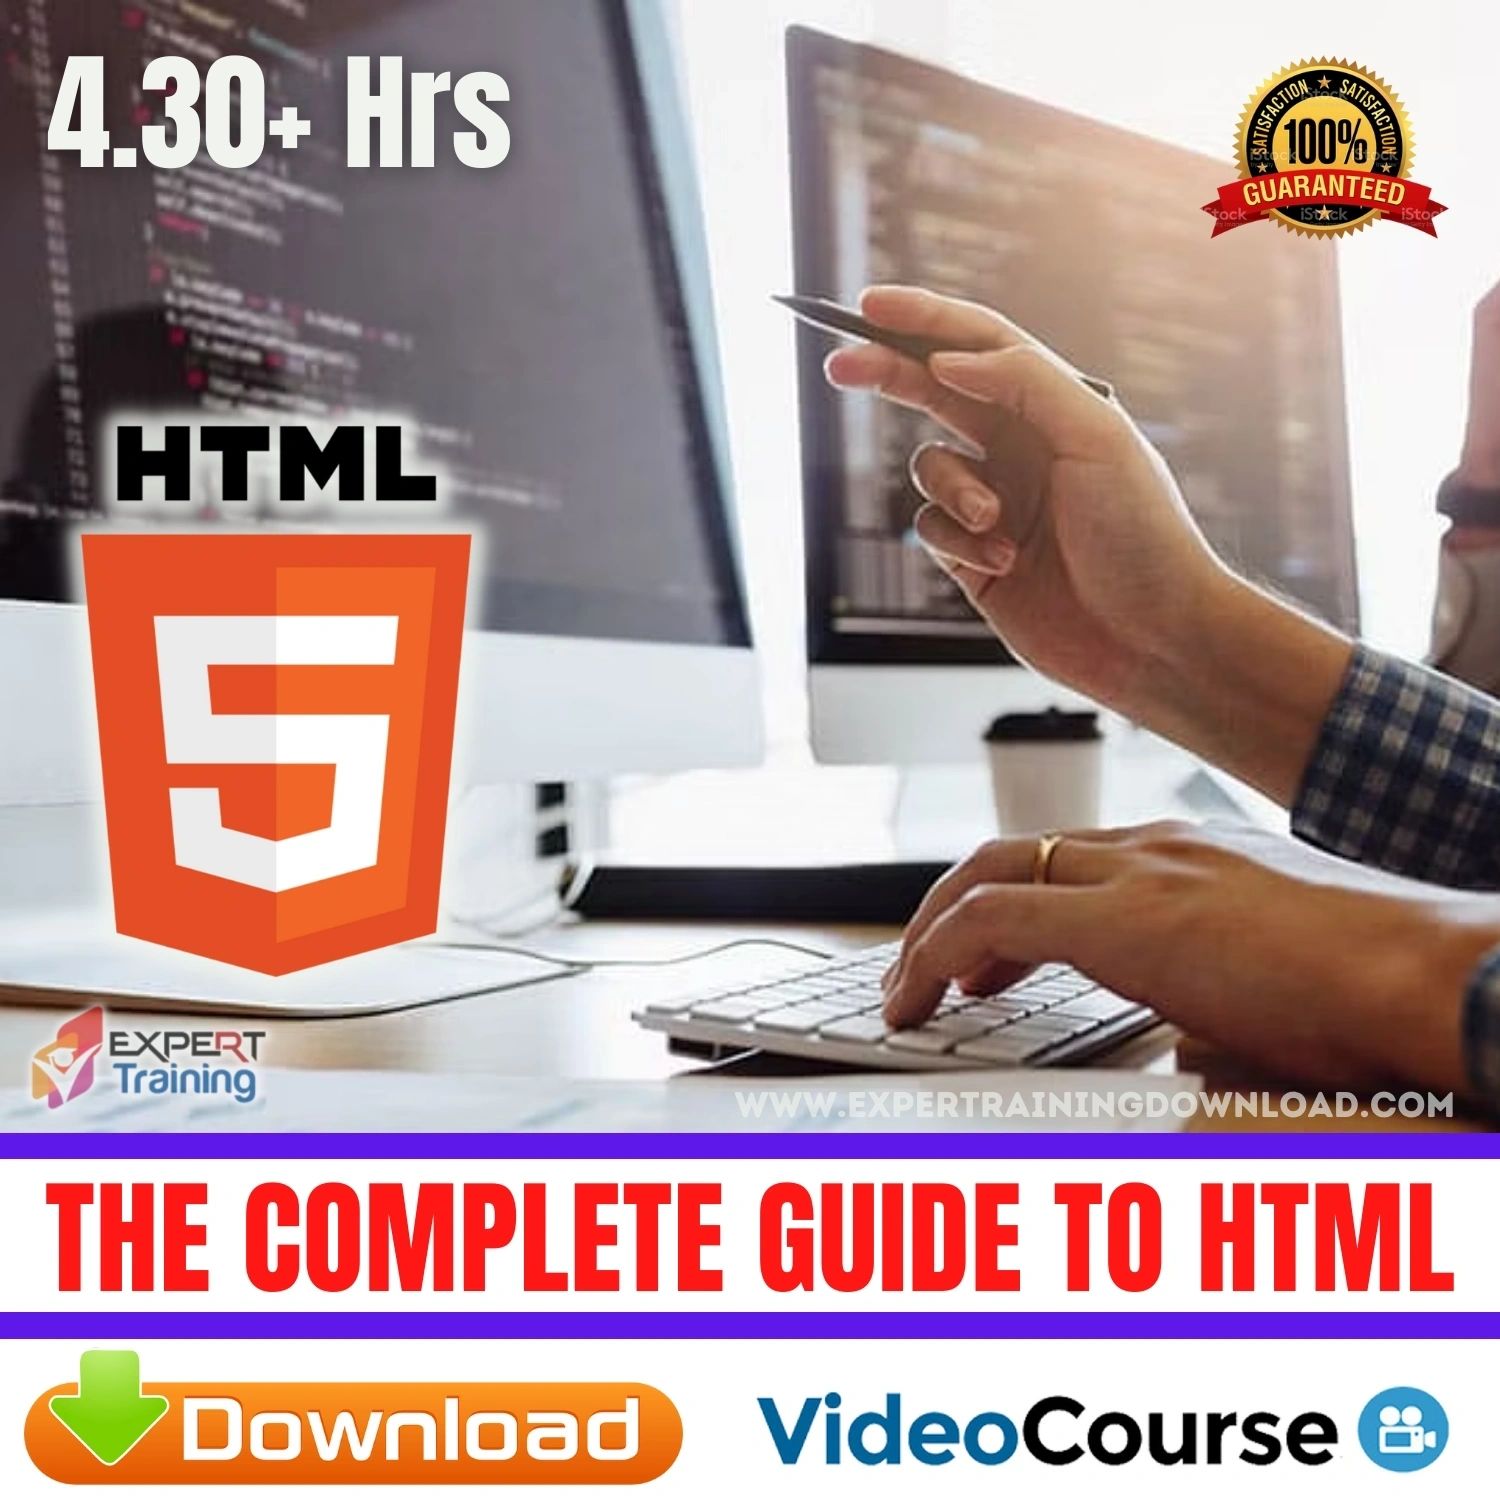 The Complete Guide to HTML